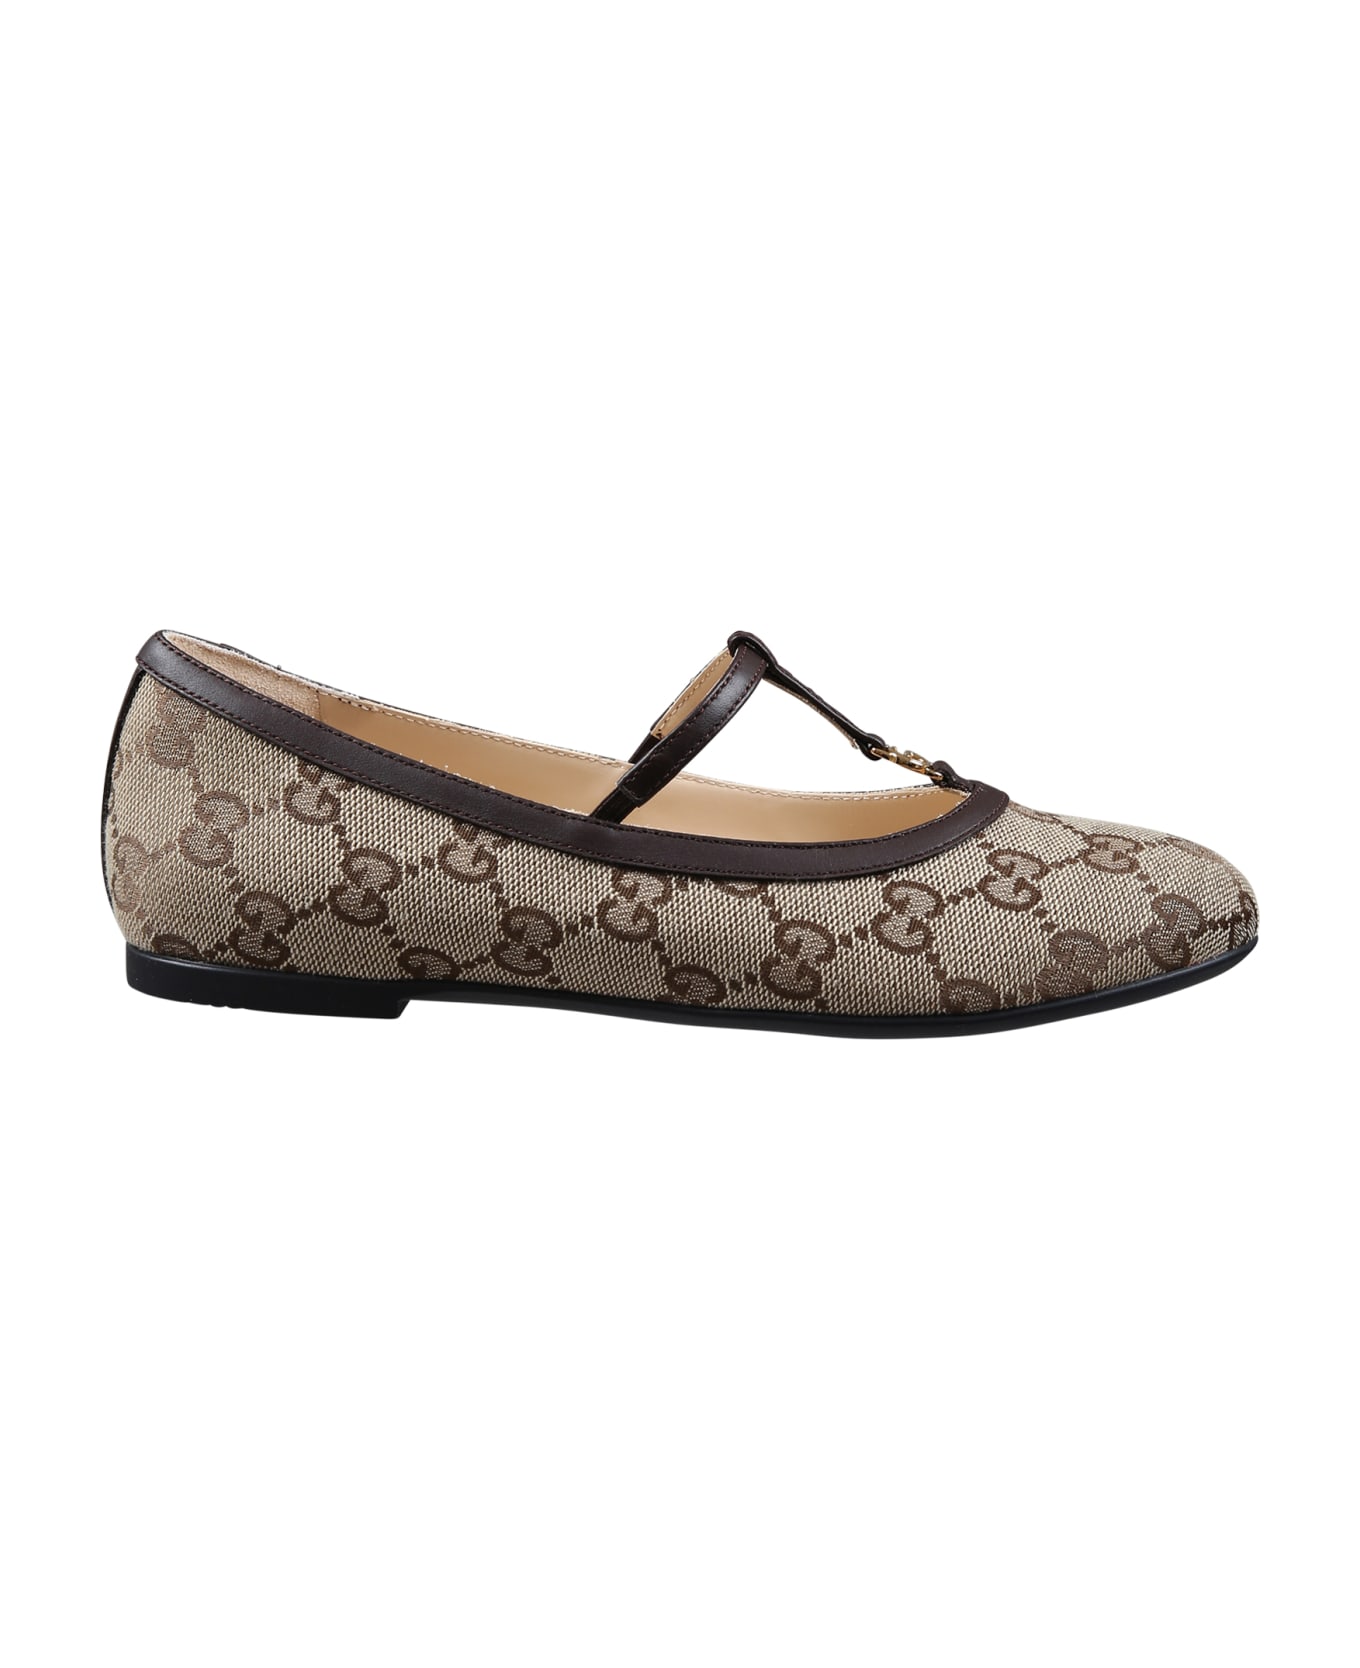 Gucci Brown Ballet Flats For Girl With Gg - Beige シューズ